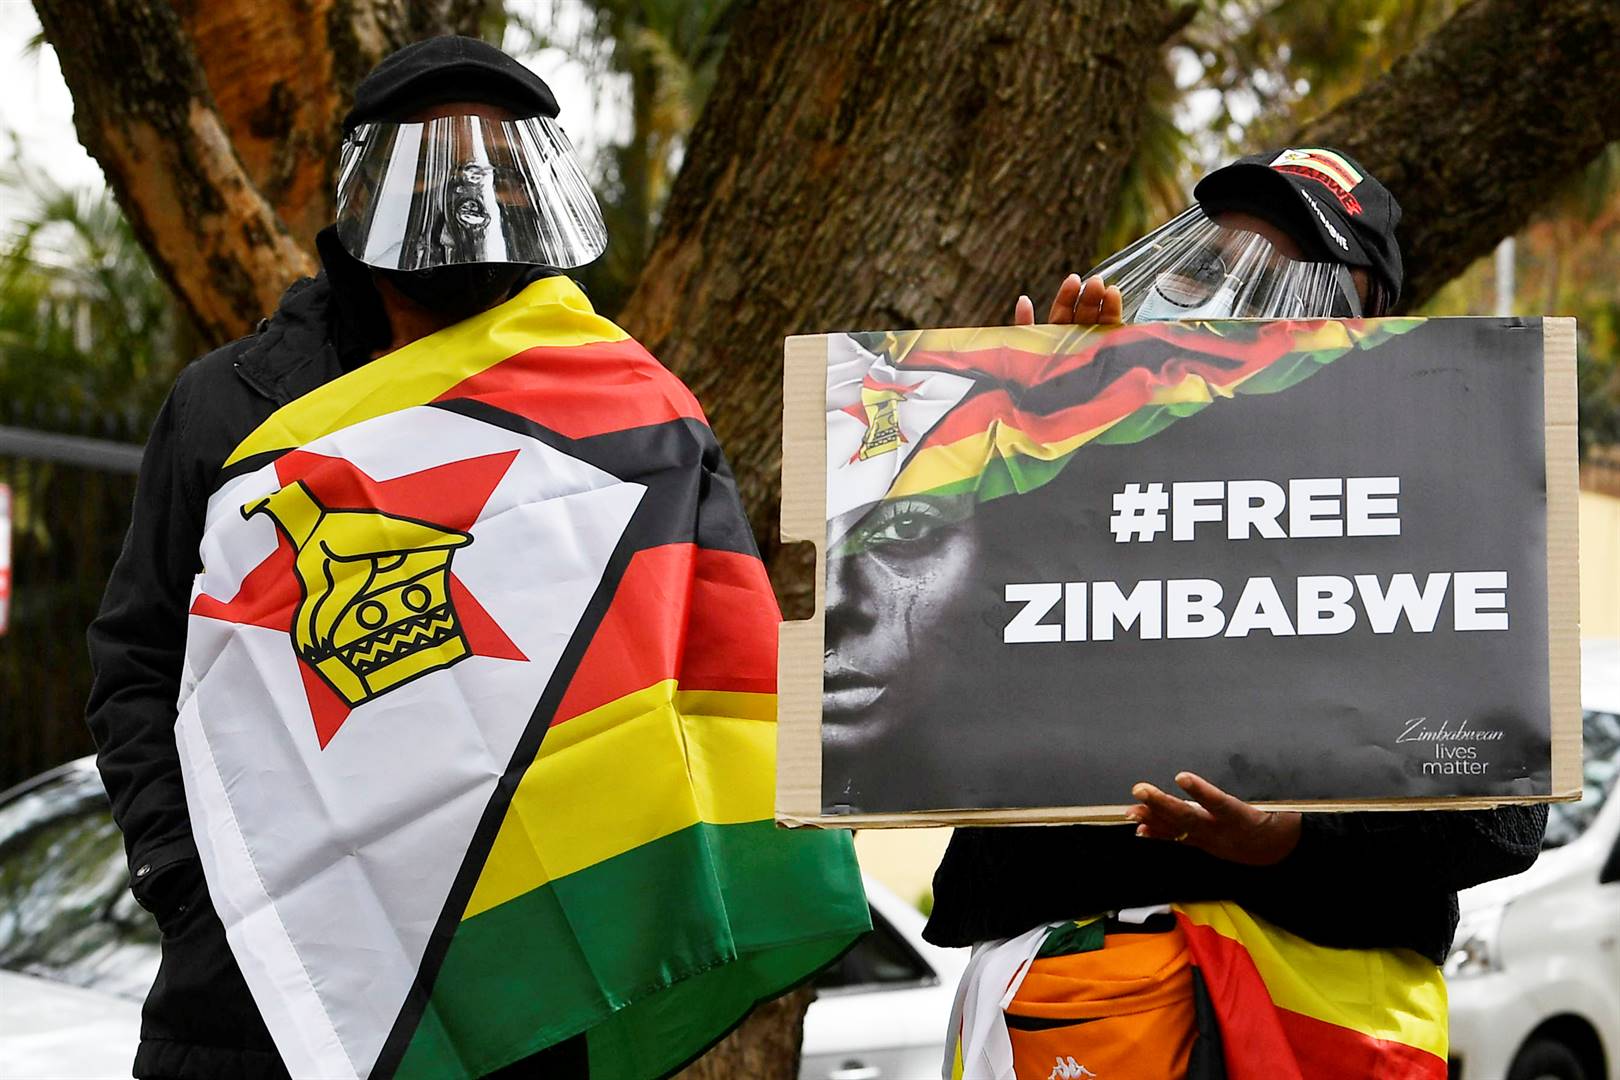 Zimbabwe sanctions should go as they only worsen crisis, UN expert says